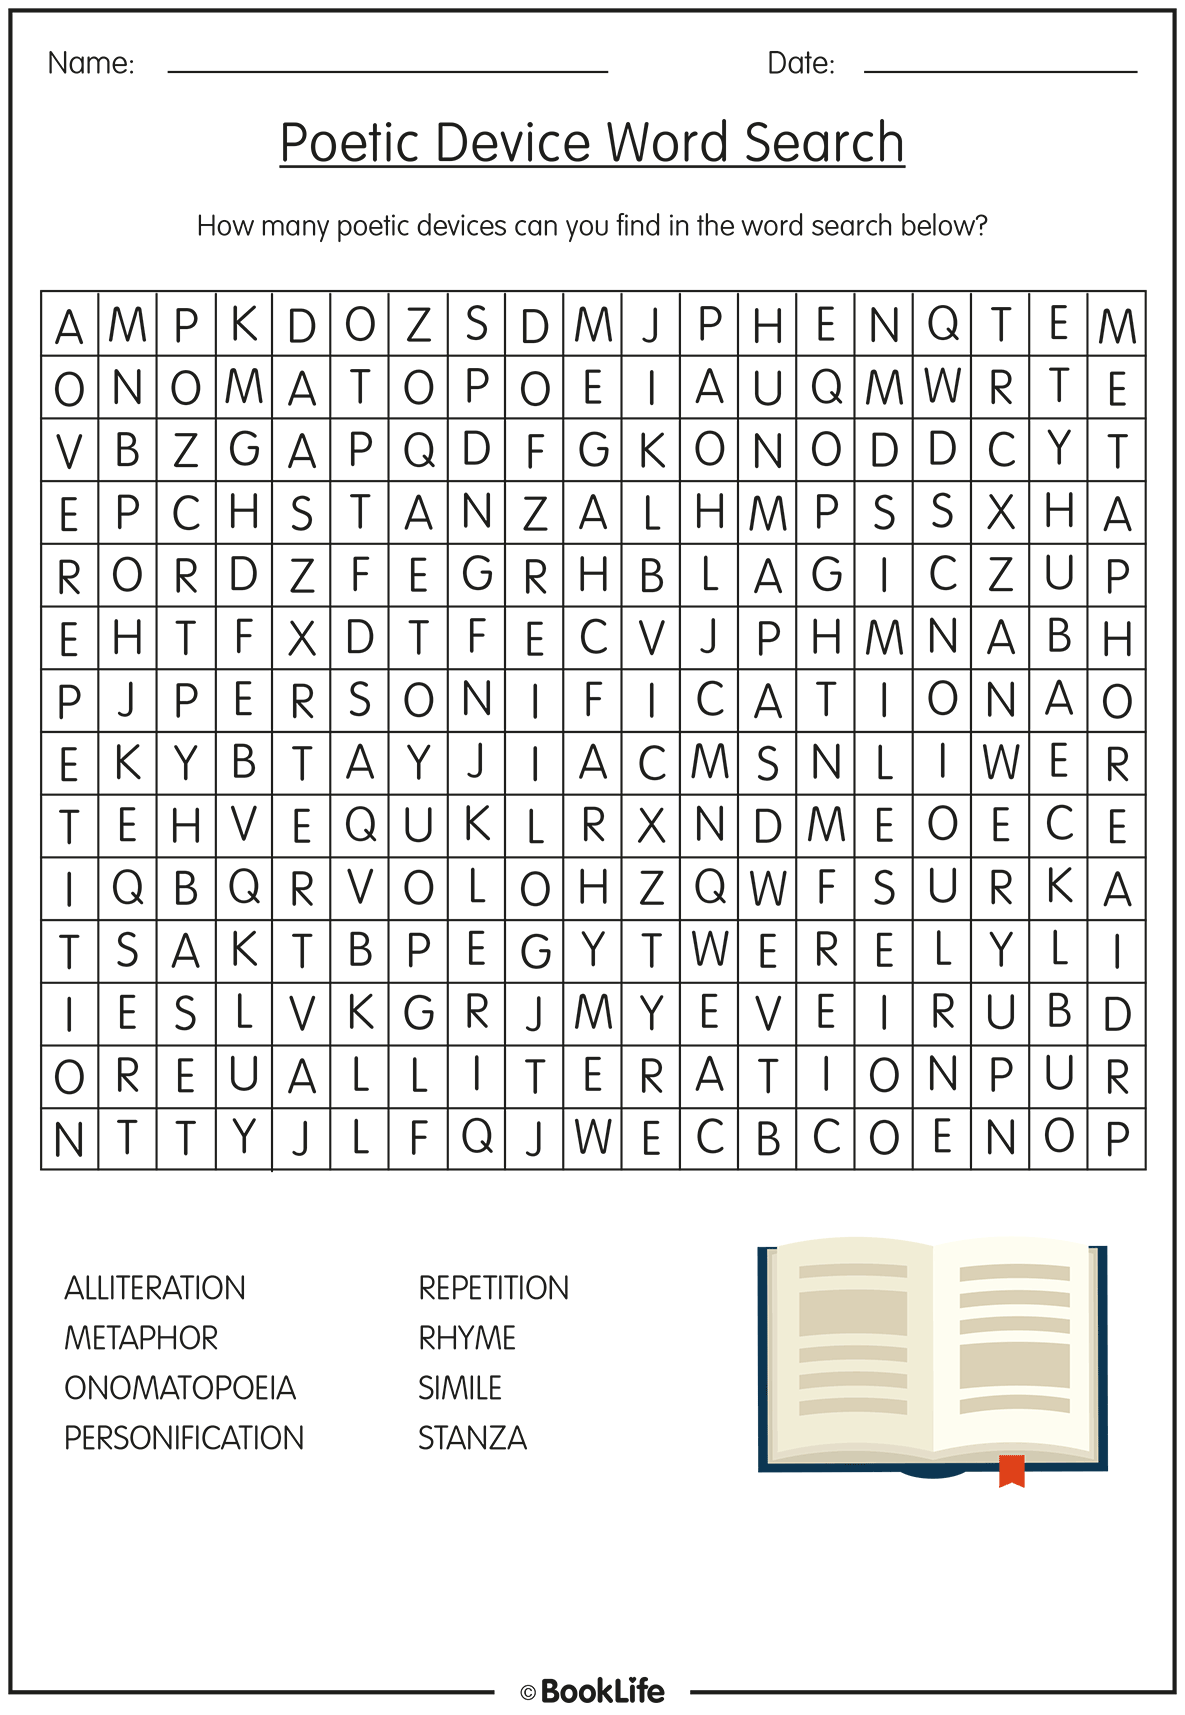 Poetic Device Word Search by BookLife